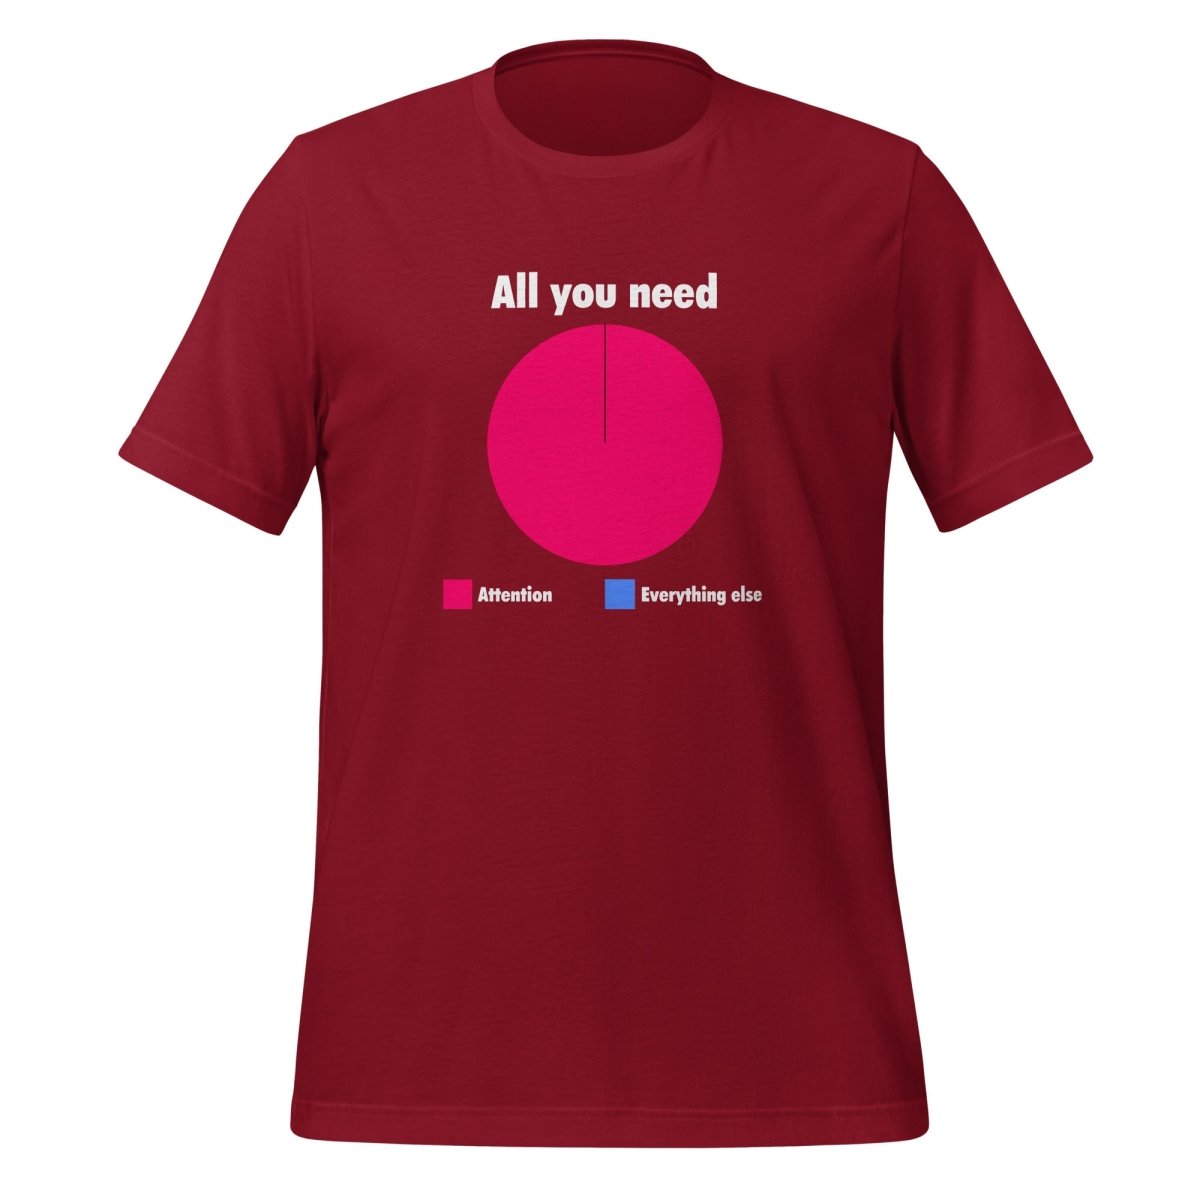 All You Need is Attention Pie Chart T - Shirt (unisex) - Cardinal - AI Store